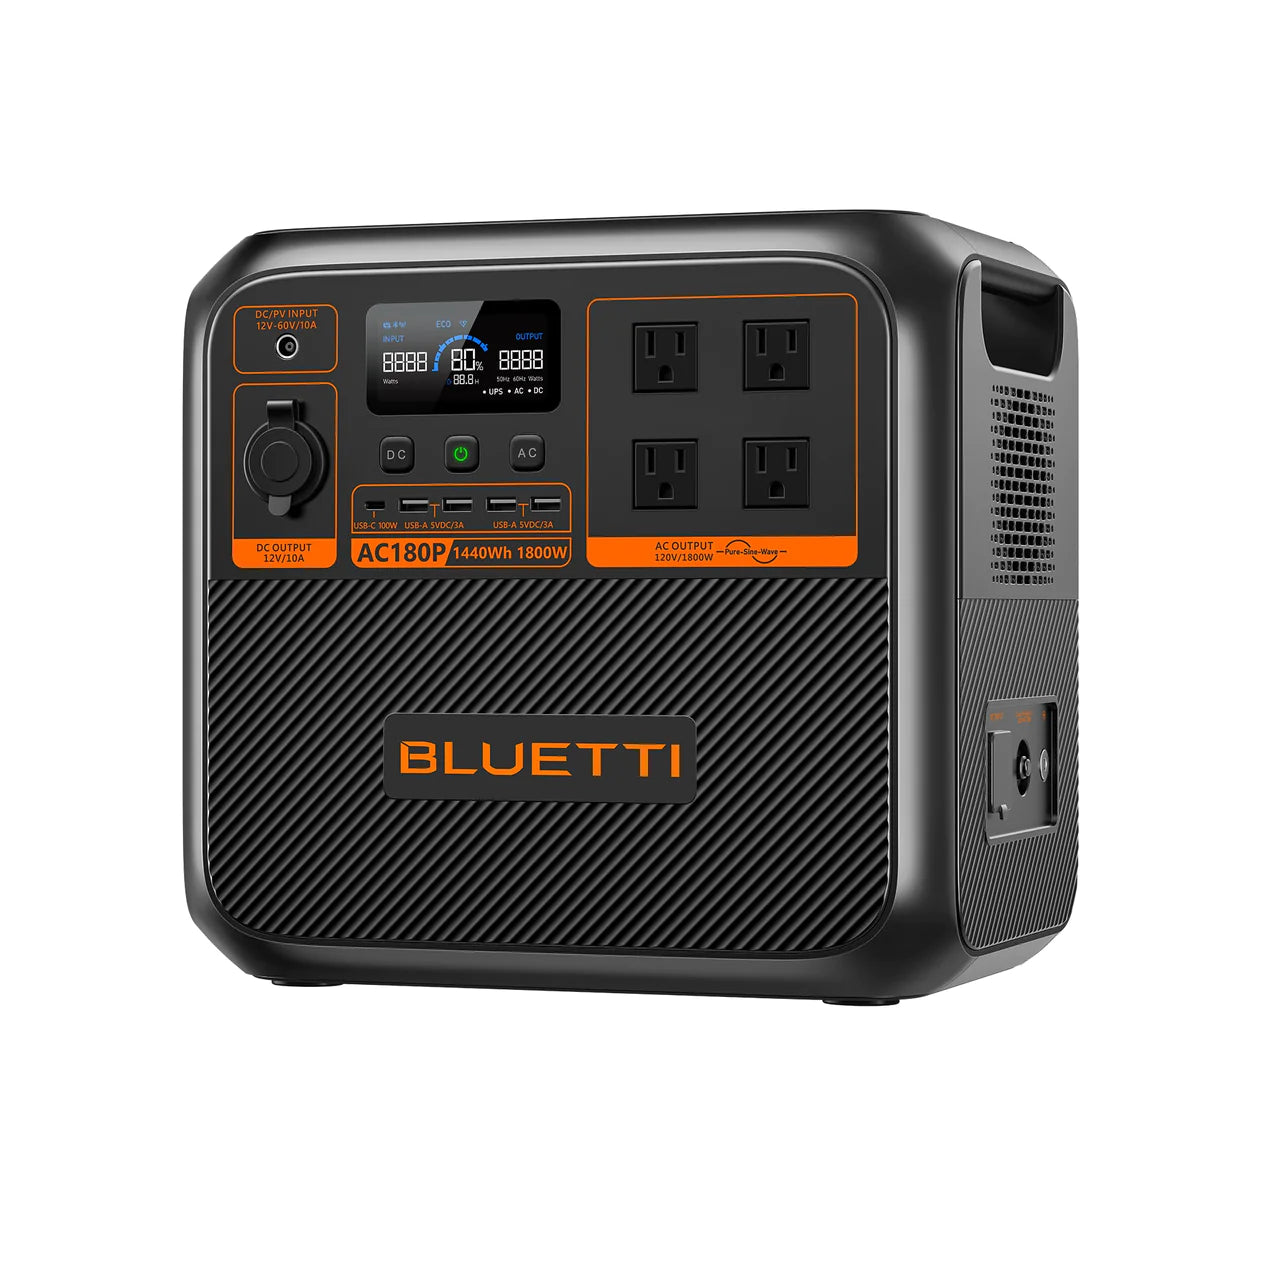 BLUETTI AC180P Solar Portable Power Station | 1,800W with 1,440Wh Capacity